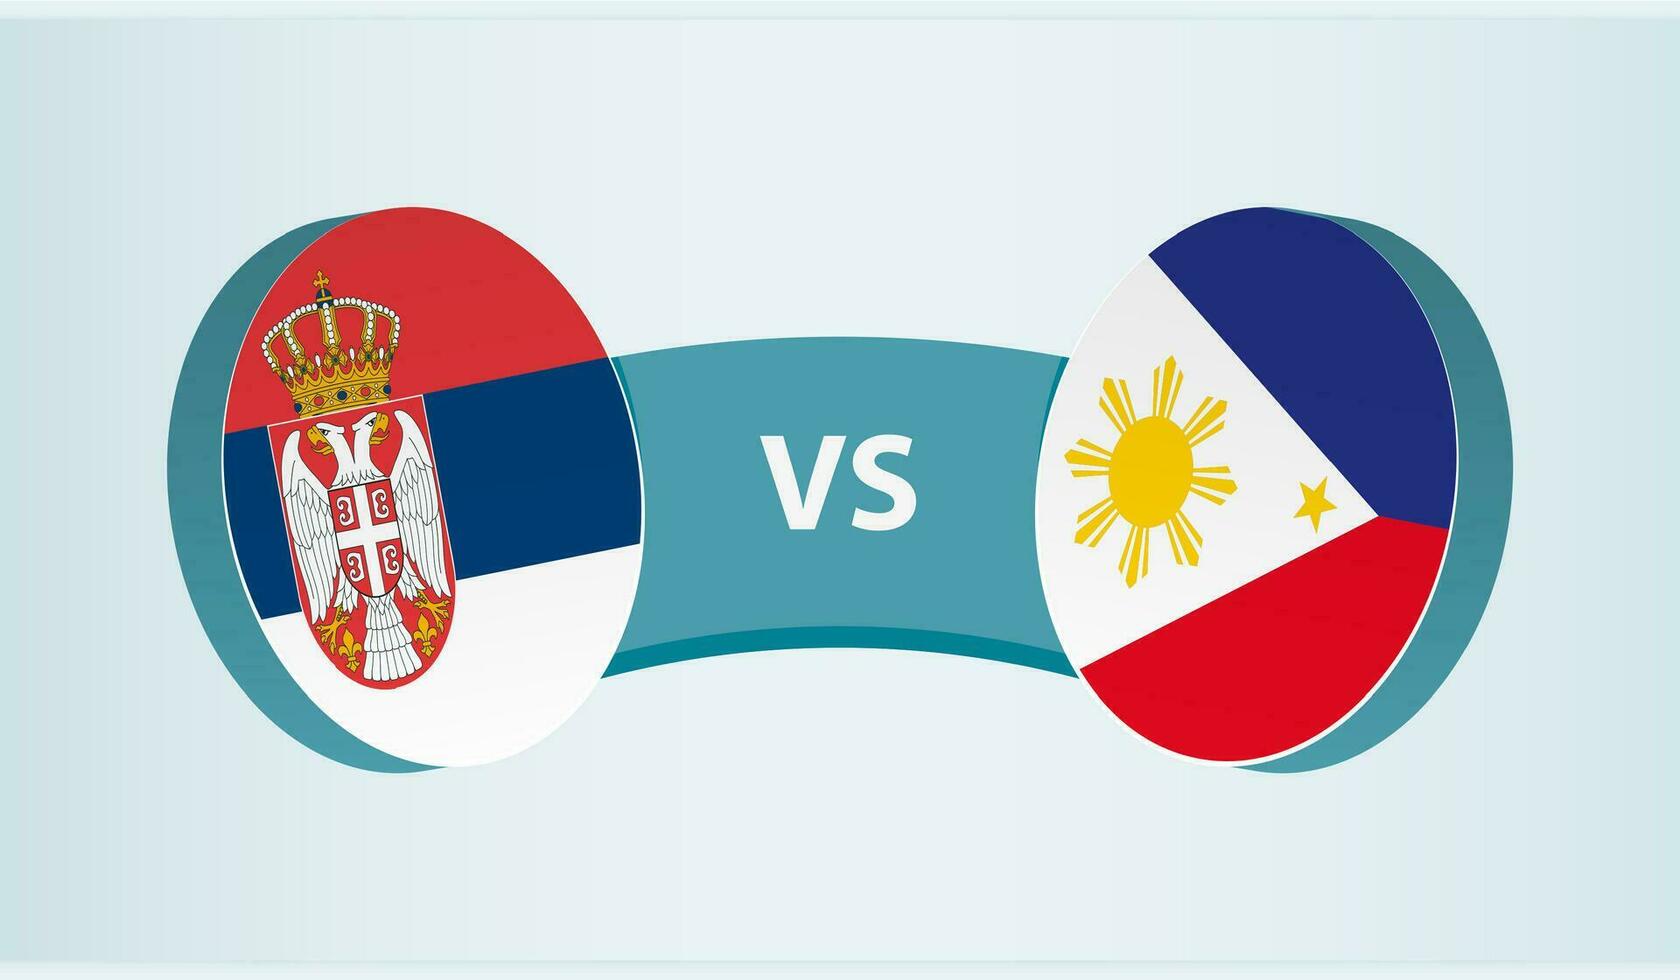 Serbia versus Philippines, team sports competition concept. vector